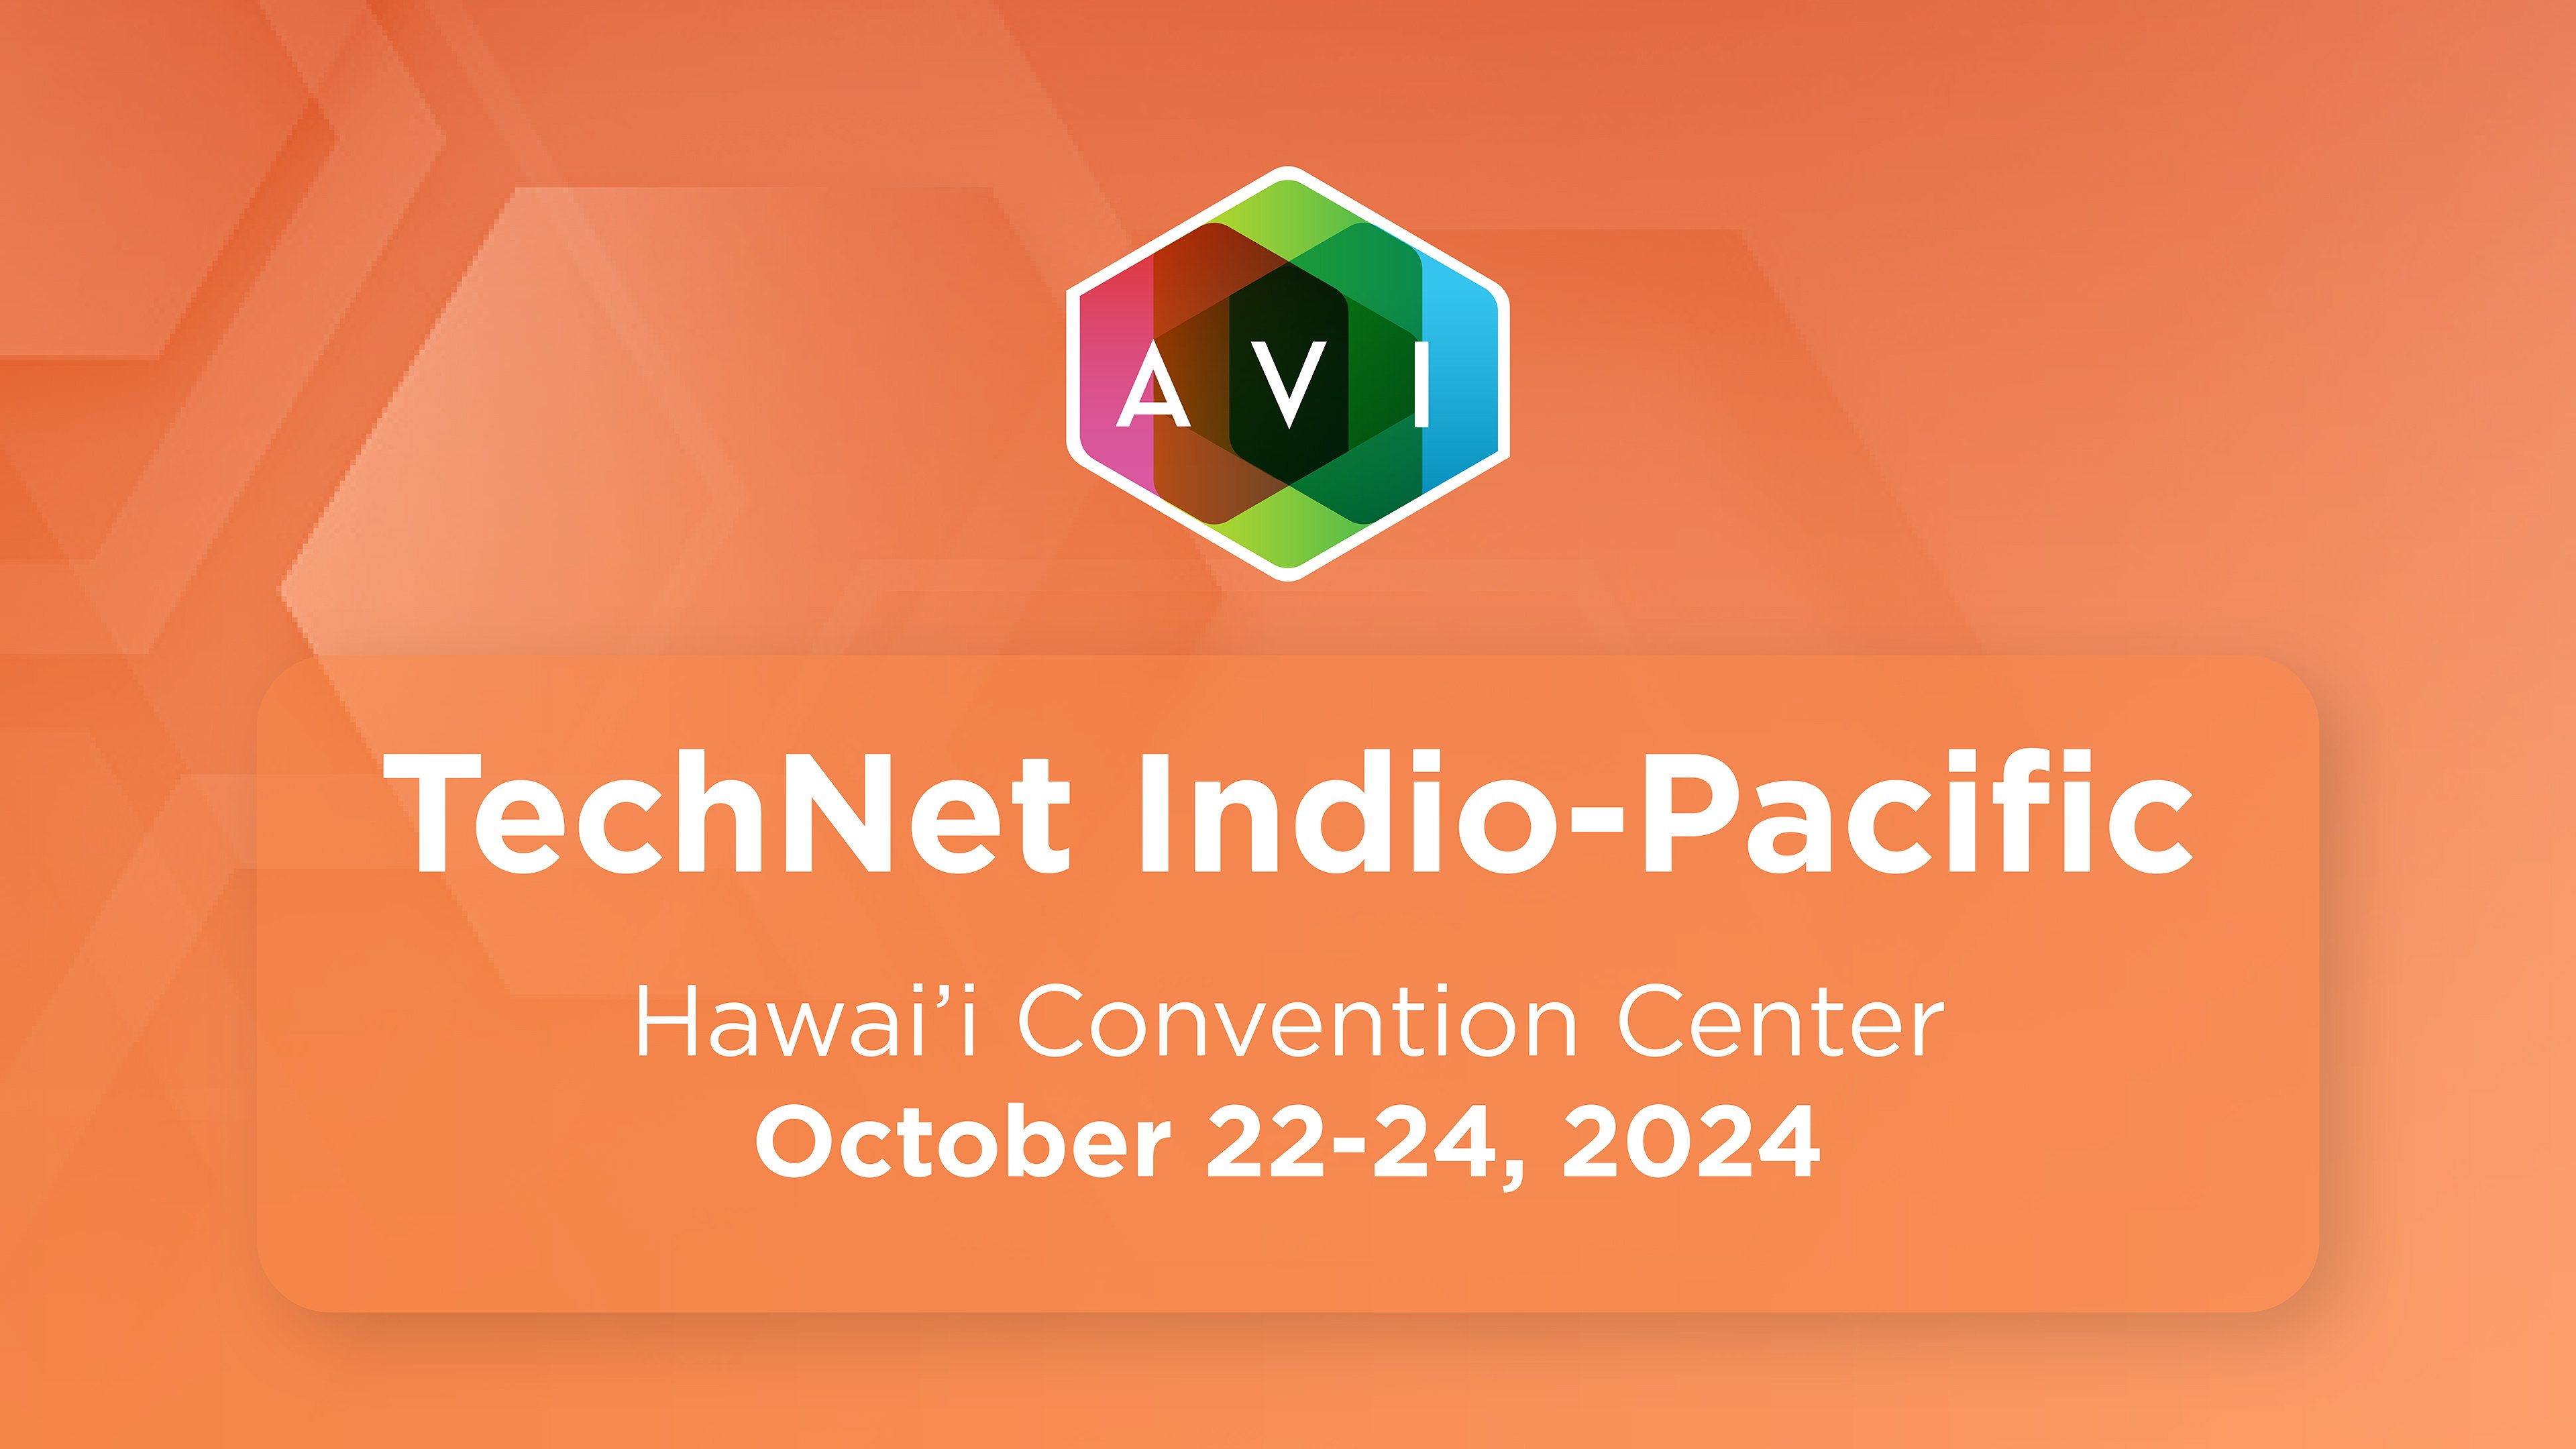 Image{width=444,height=250,url='https://www.avisystems.com/hubfs/events/additional-events/2024/technet-indio-pacific-event-page-thumbnail.jpg',altText='technet-indio-pacific-event-page-thumbnail',fileId=173237395885}